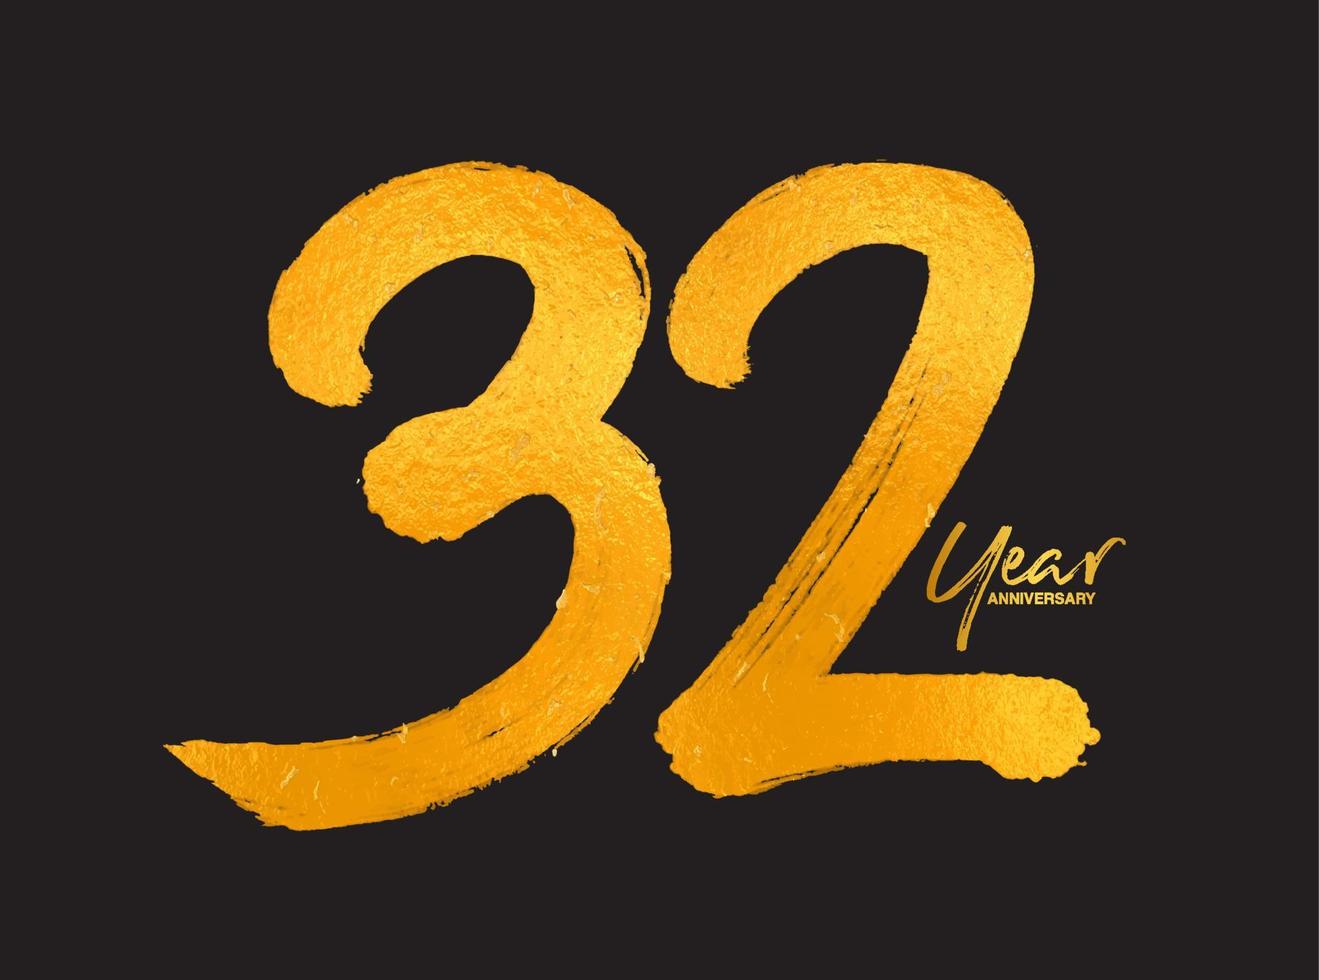 Gold 32 Years Anniversary Celebration Vector Template, 32 Years  logo design, 32th birthday, Gold Lettering Numbers brush drawing hand drawn sketch, number logo design vector illustration